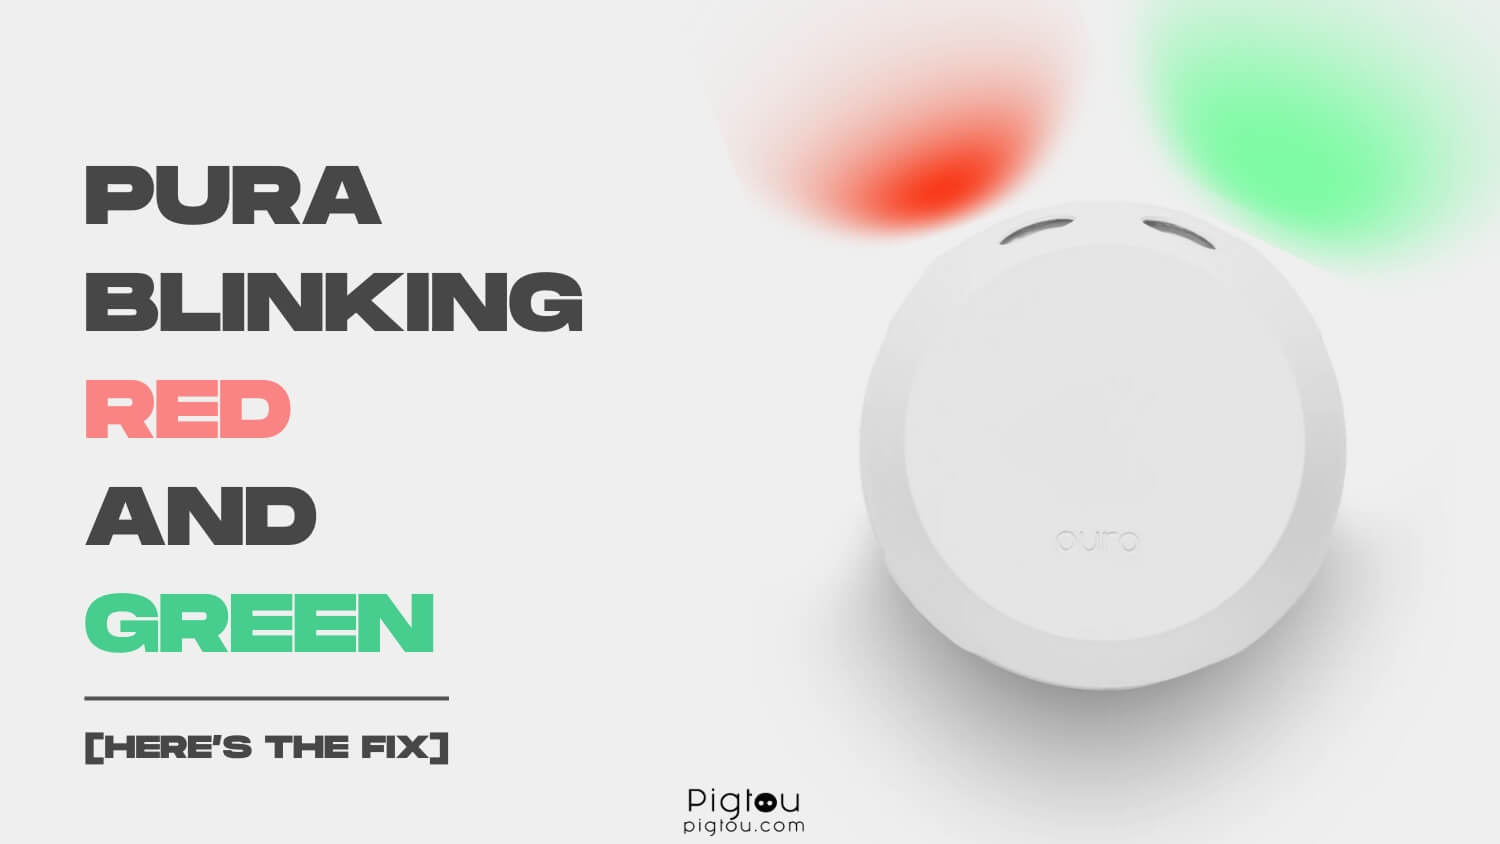 Pura Blinking Red and Green [HERE'S THE FIX!]